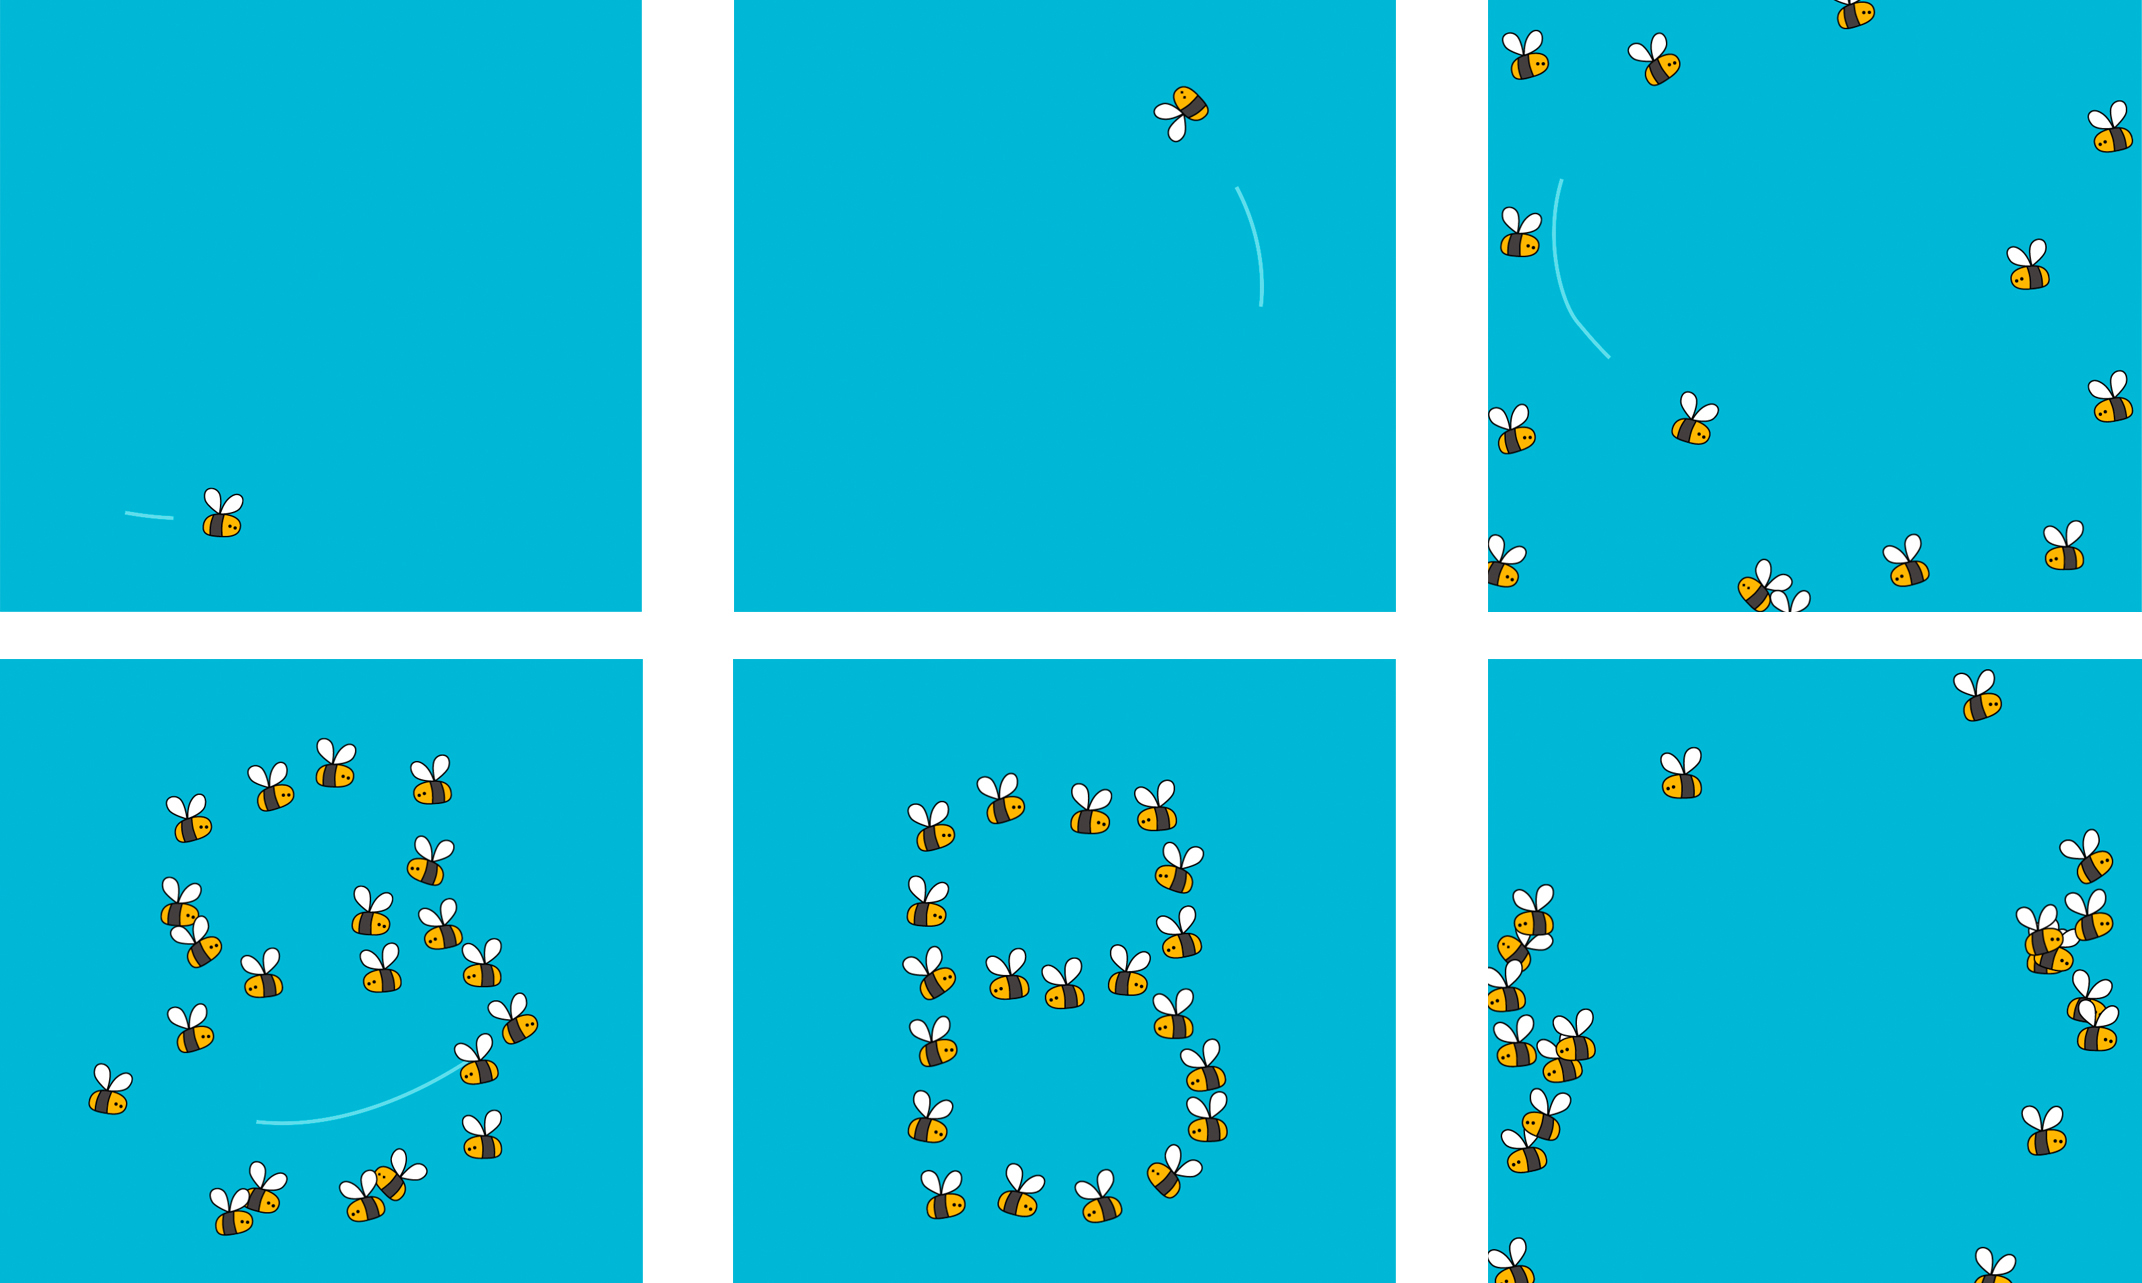 Link to Steph Jones' work blog. Image shows six stages of animation showing Bees flying in to form the shape of the letter B